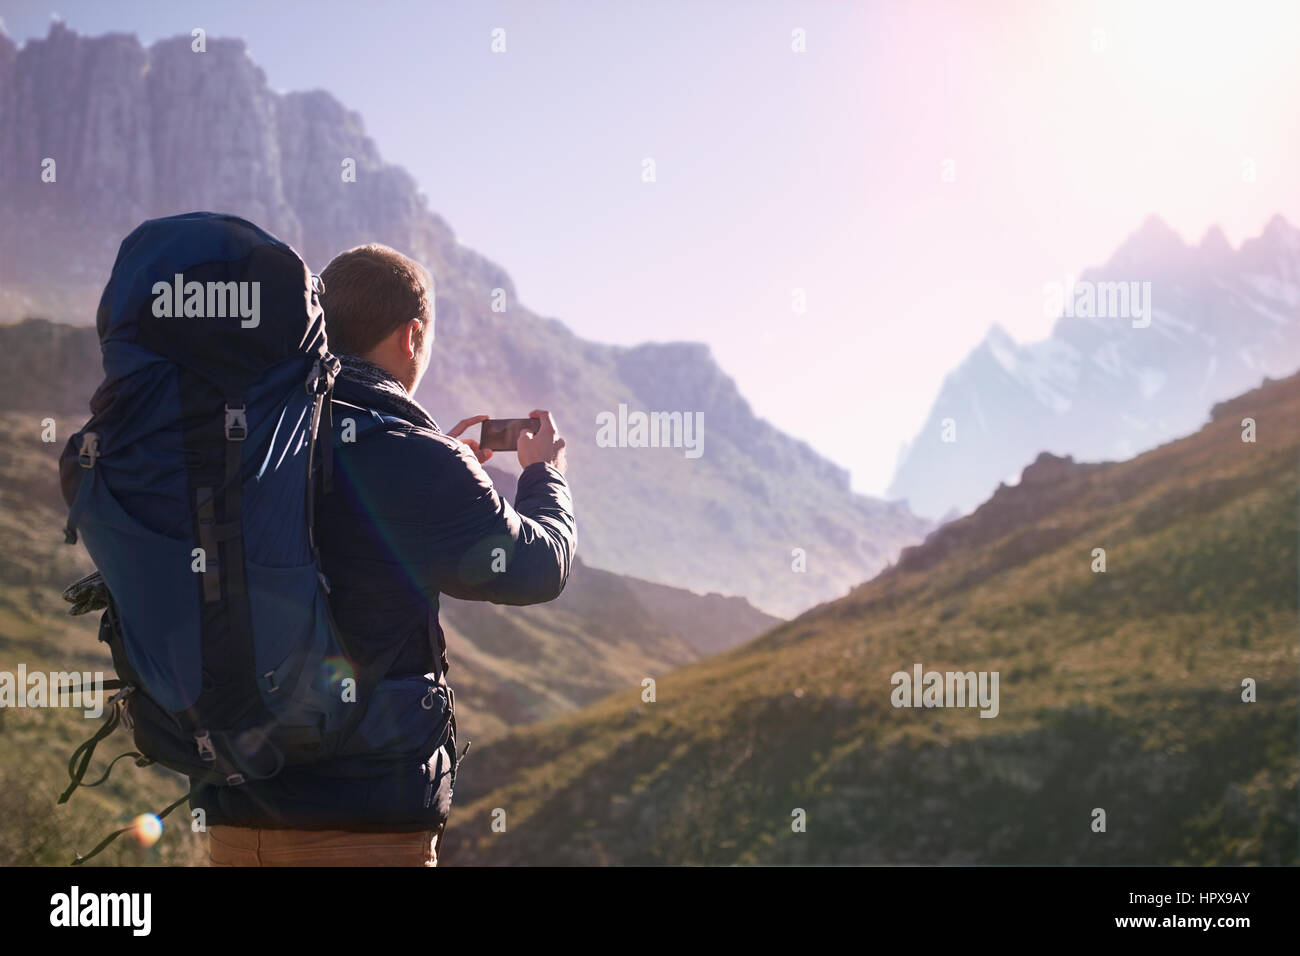 Young man with backpack using camera phone in sunny valley below mountains Stock Photo